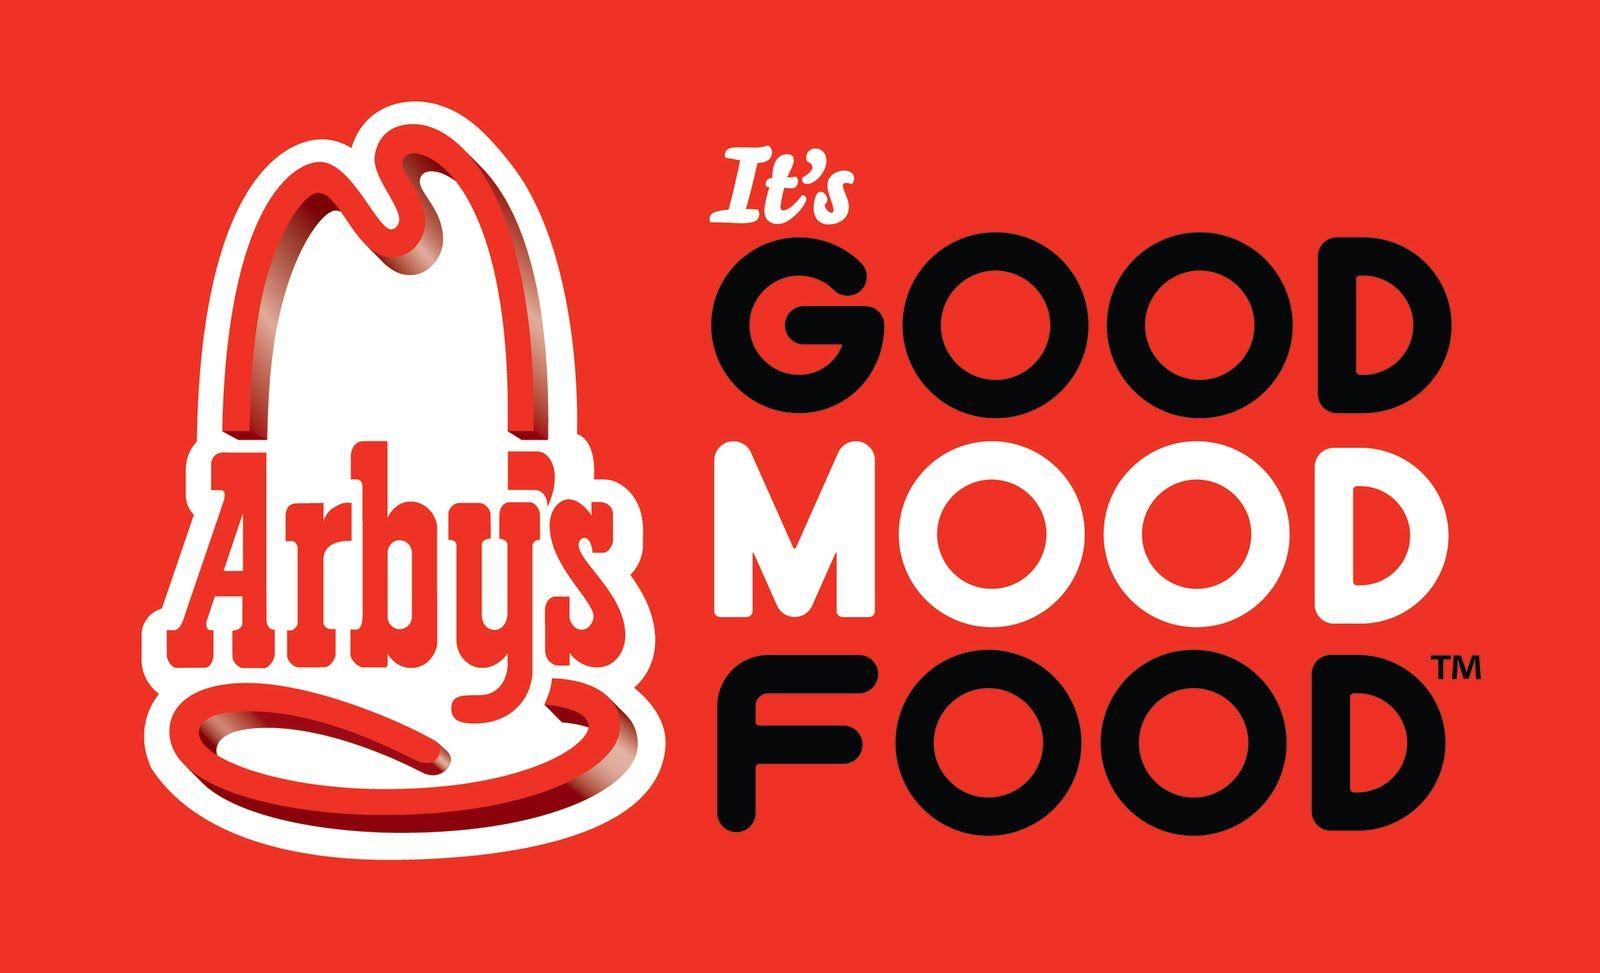 Famous Fast Food Restaurant Logo - 9 Restaurant Chains You Didn't Know Had Ohio Roots